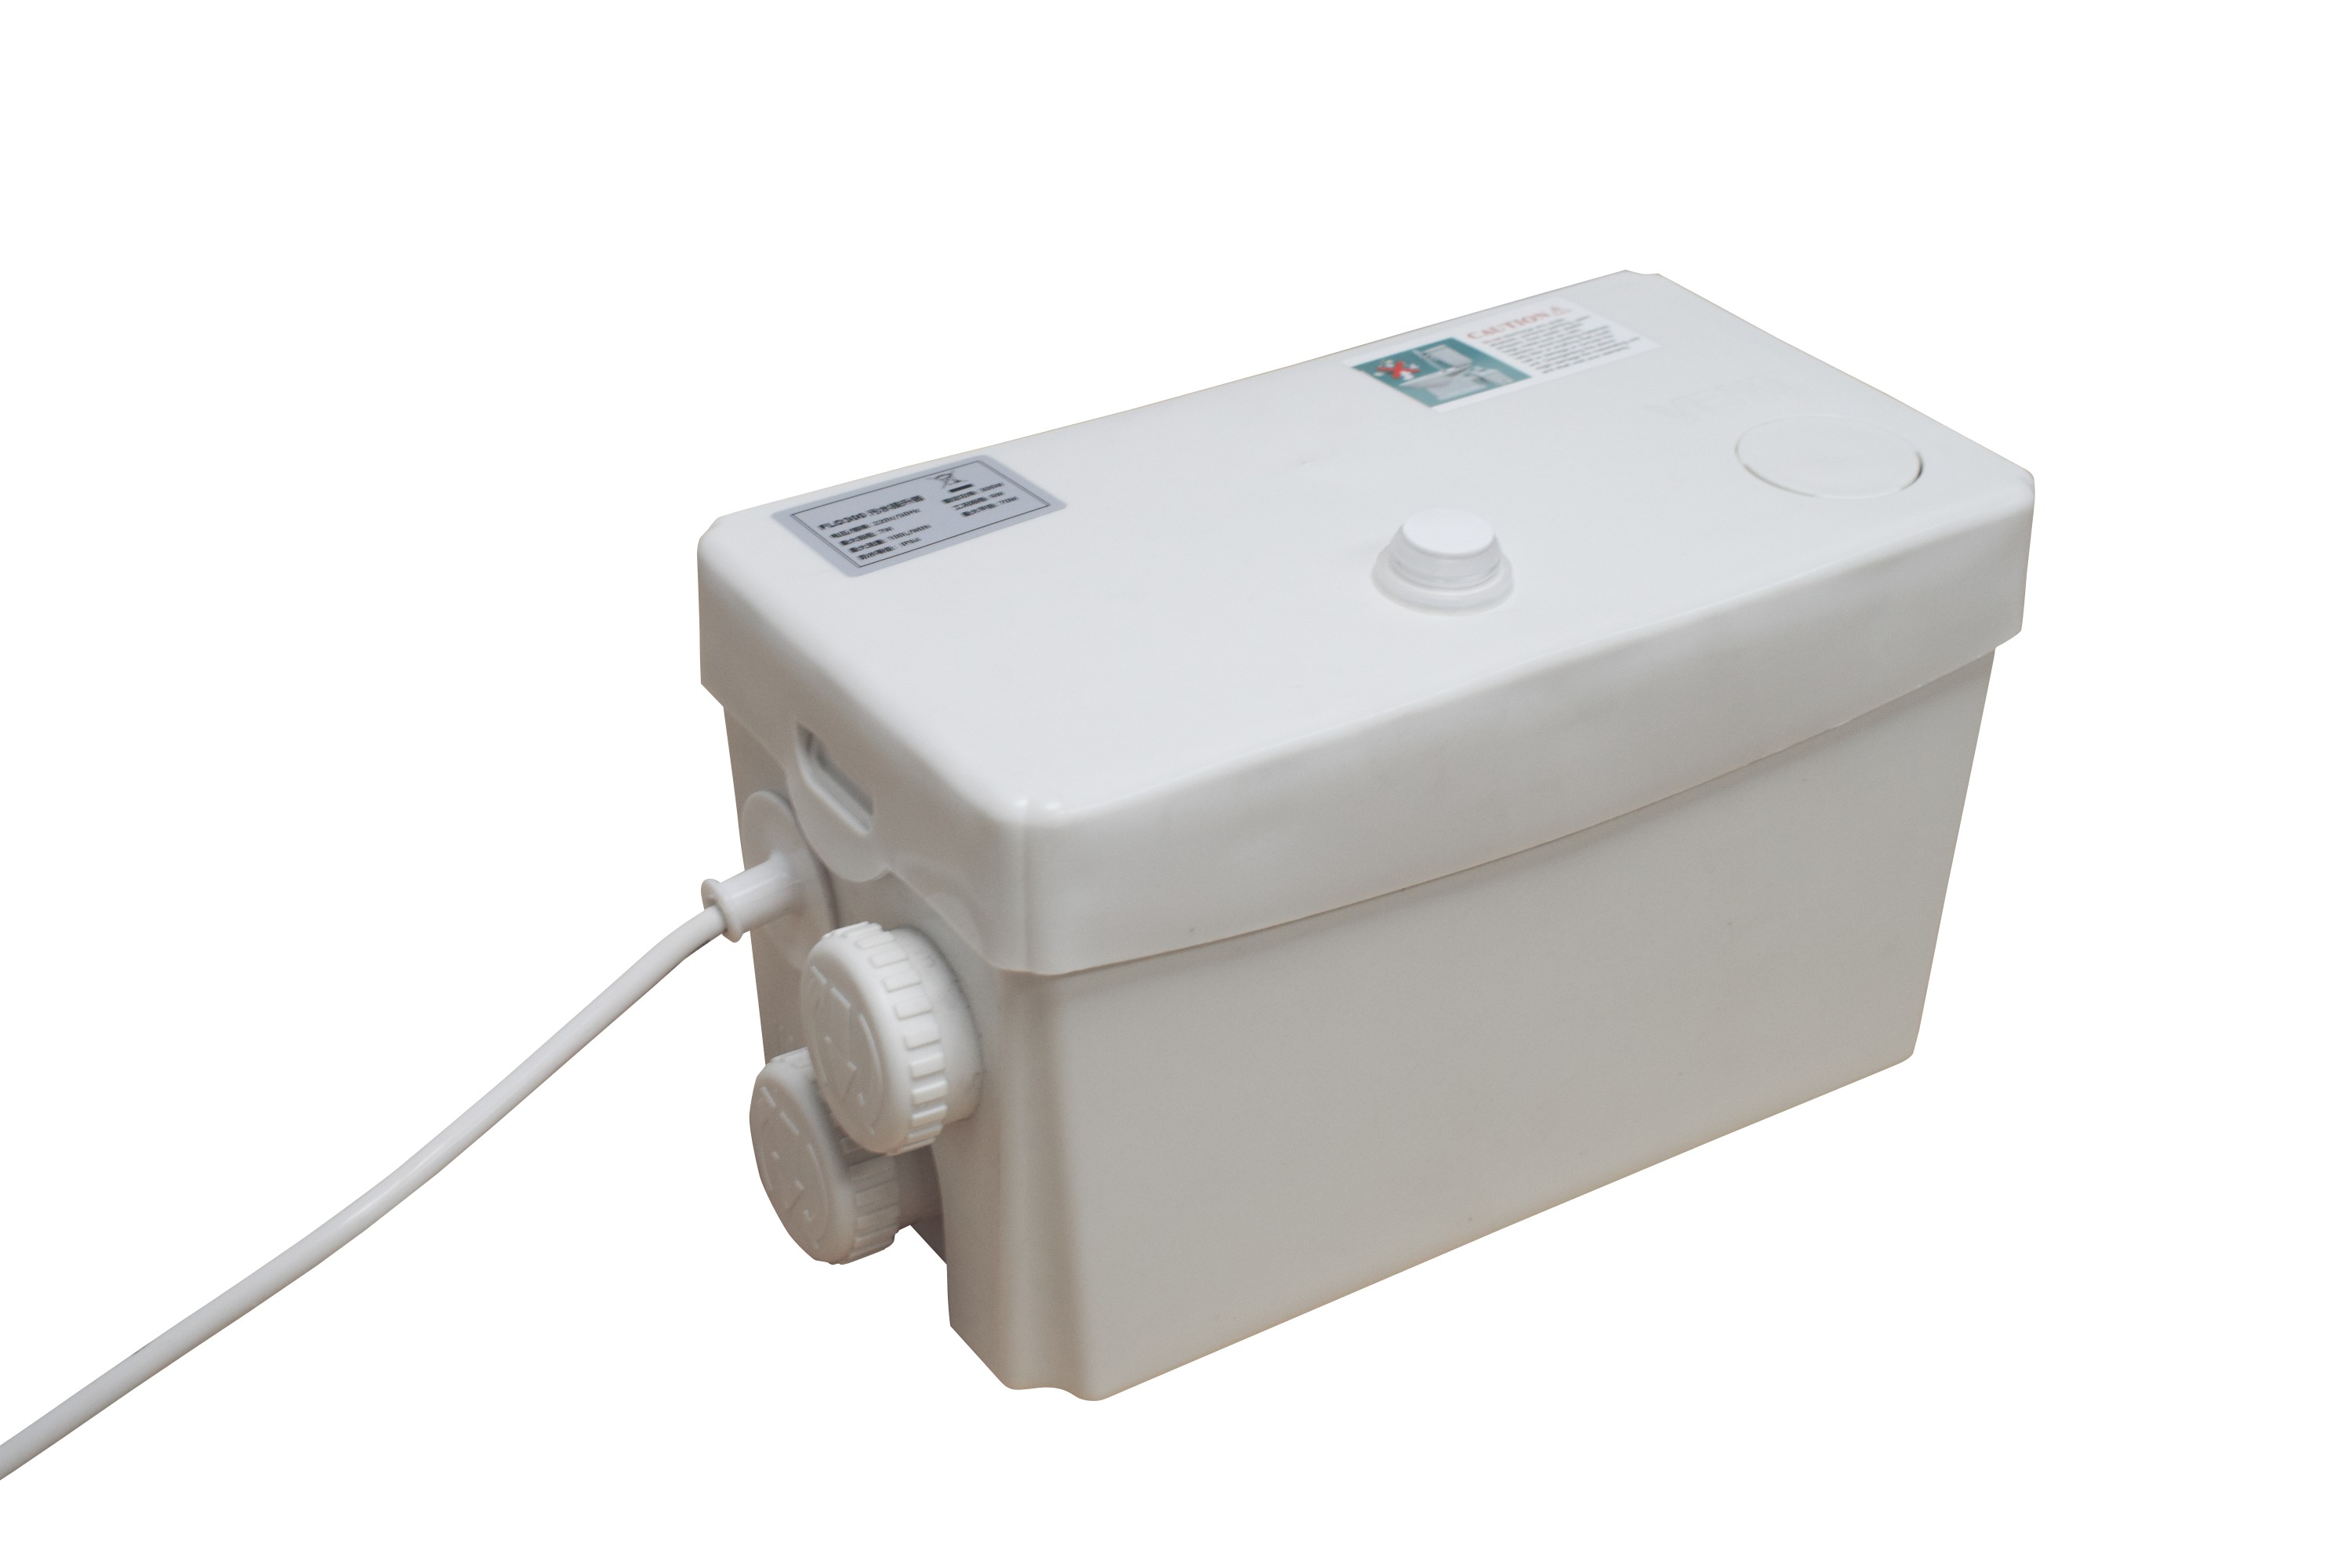 What Are The Advantages Of Using A Shower Waste Water Pump